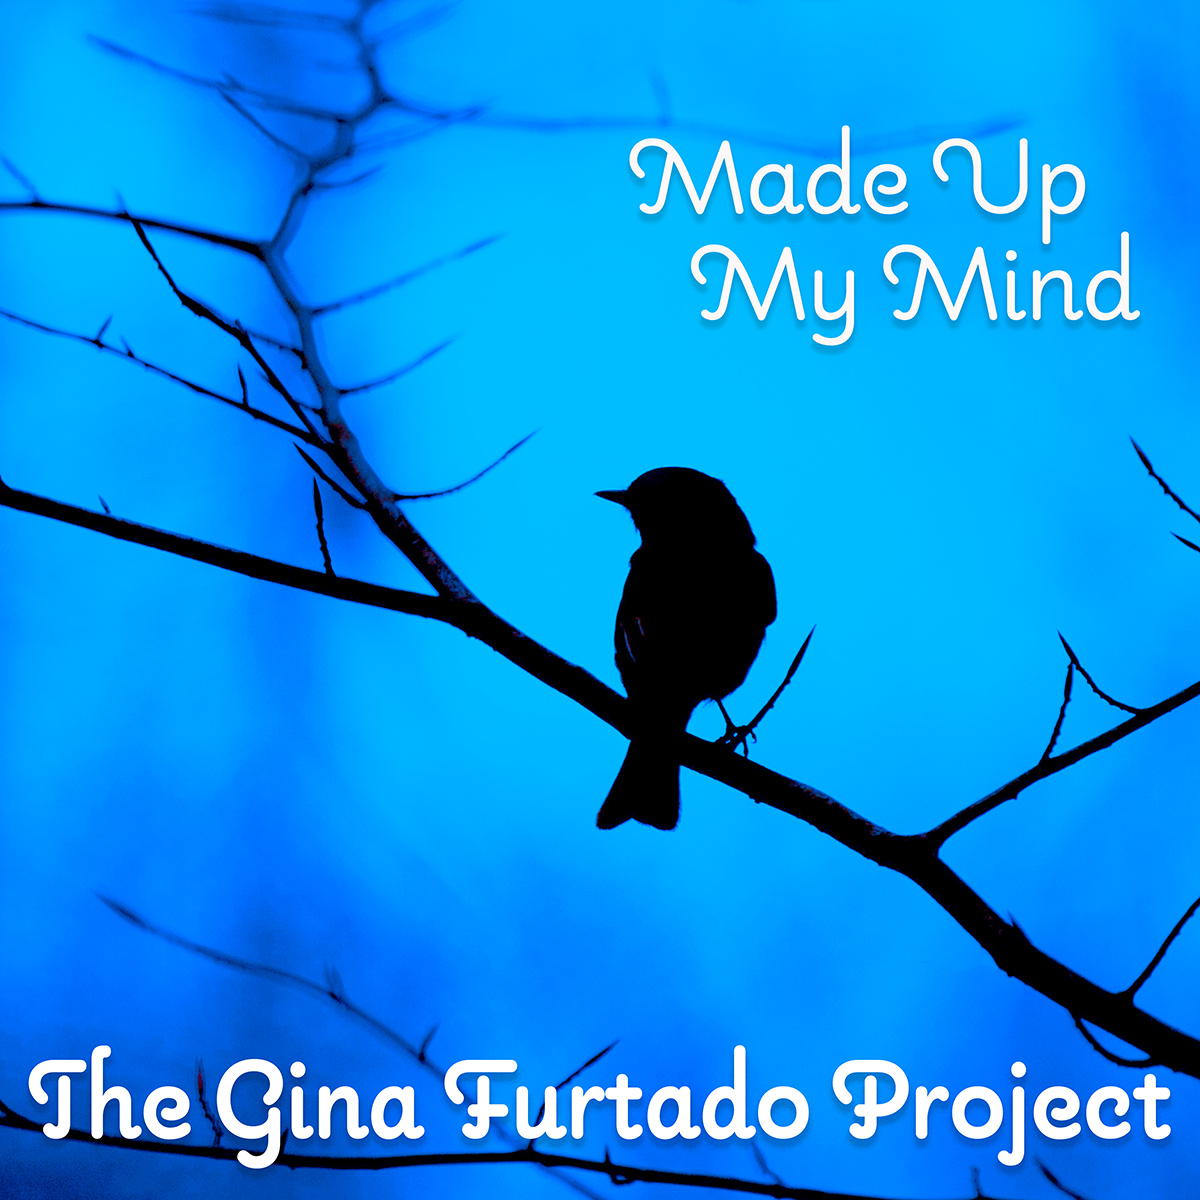 The Gina Furtado Project chooses kindness in “Made Up My Mind”